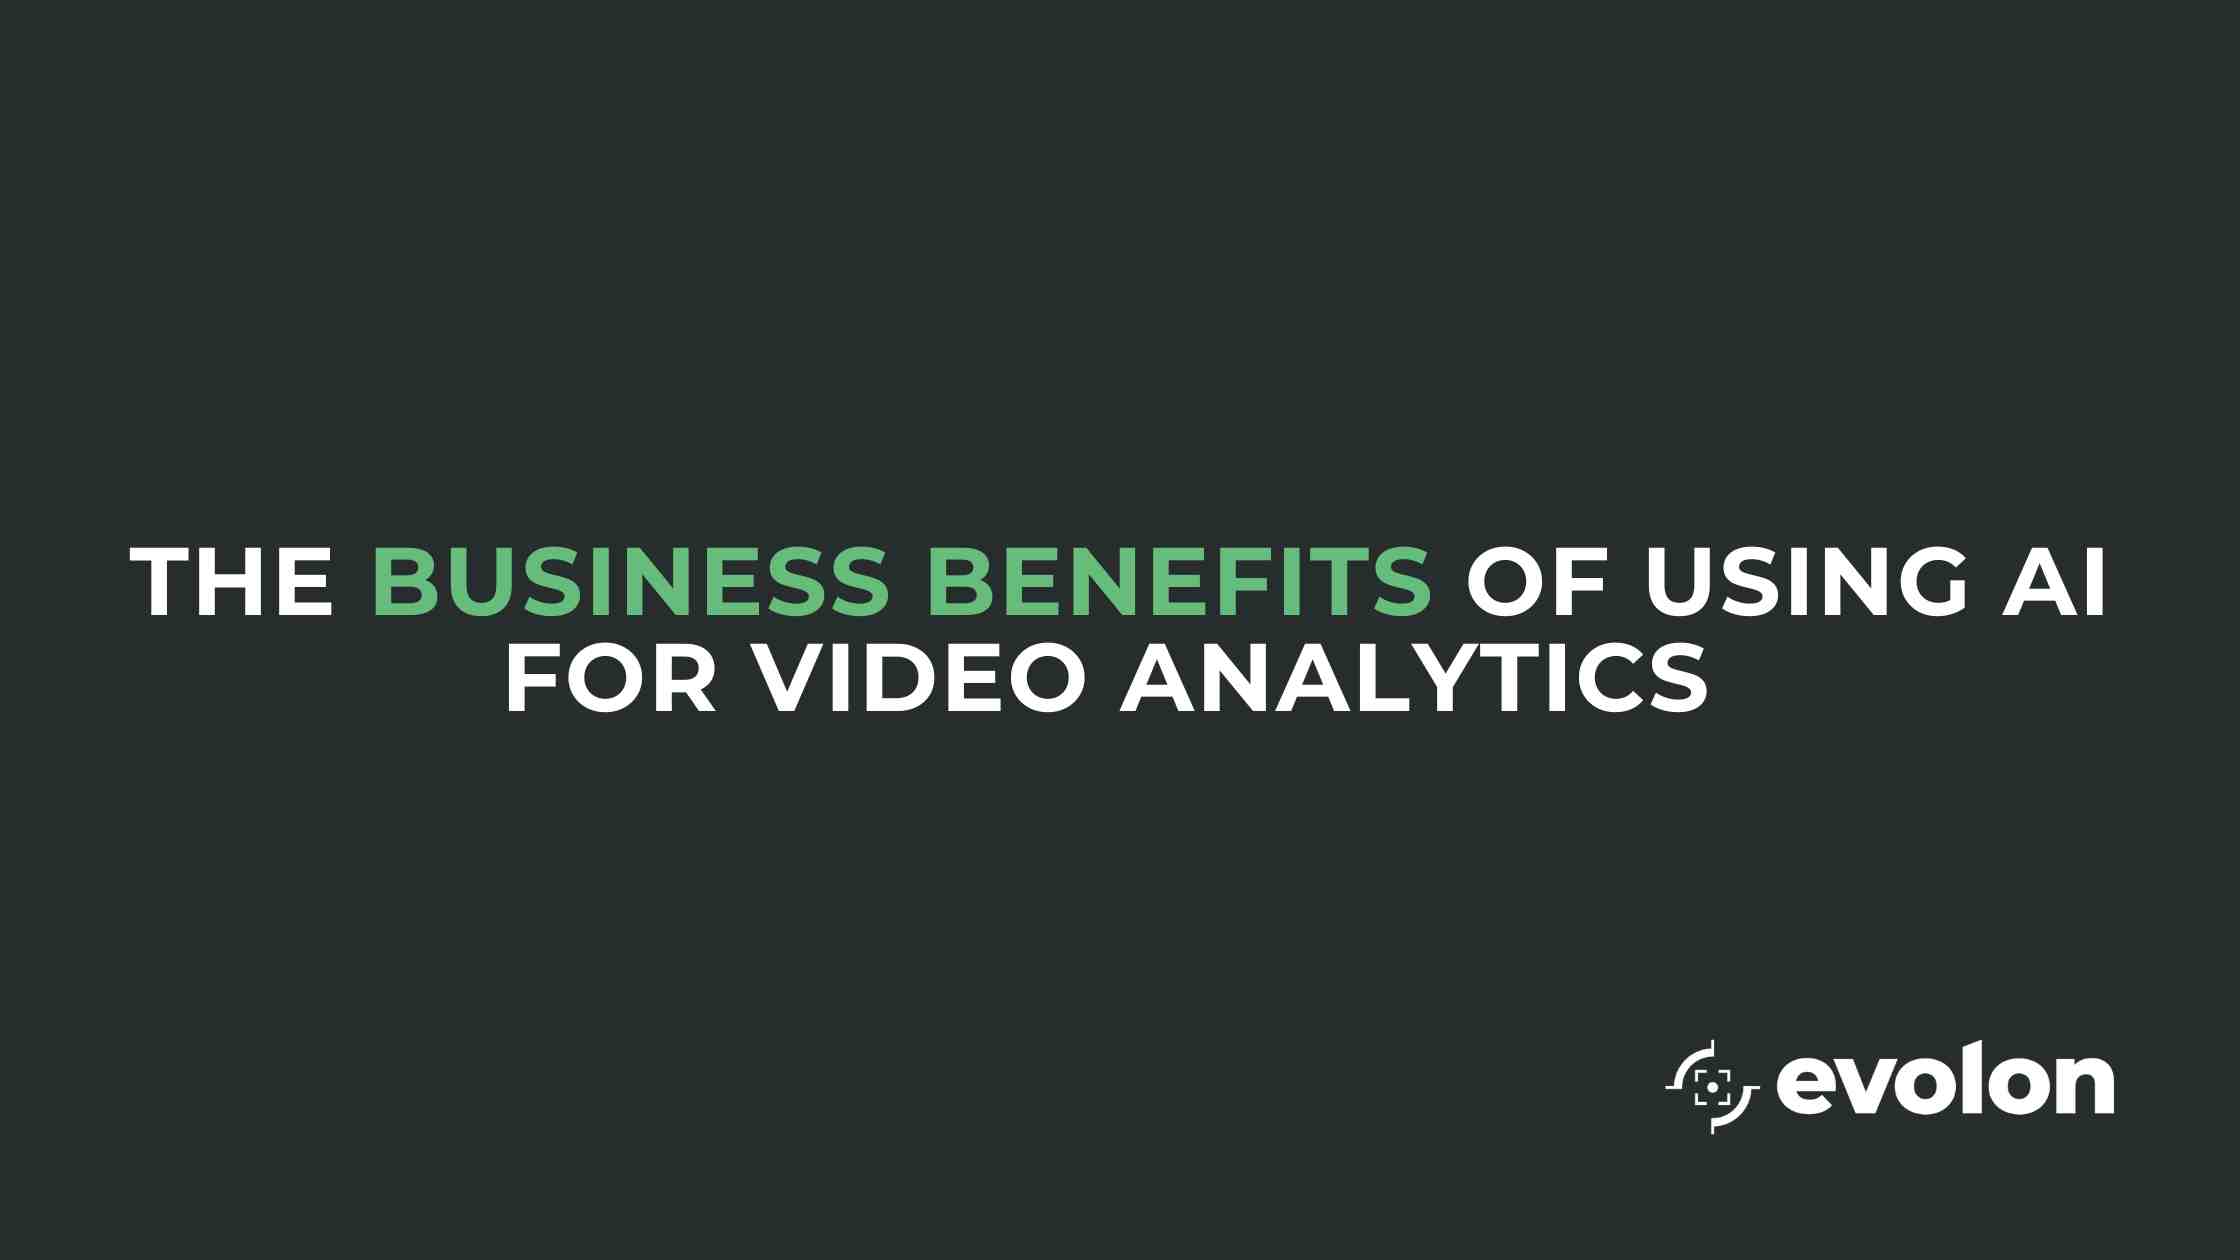 The Business Benefits of Using AI for Video Analytics